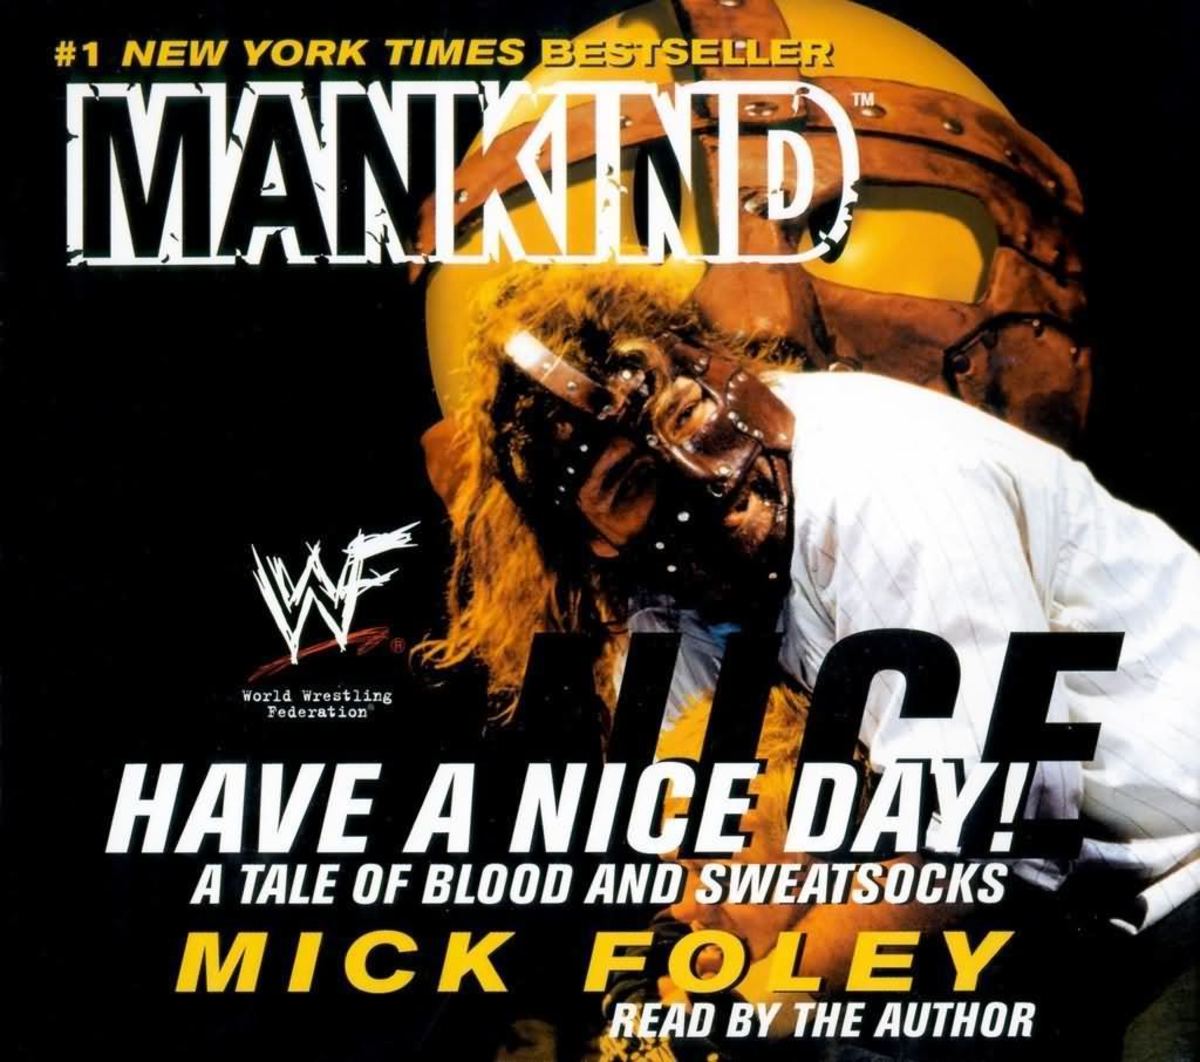 mick-foley-s-have-a-nice-day-a-tale-of-blood-and-sweat-socks-mick-foley-22329104-1024-906.jpg